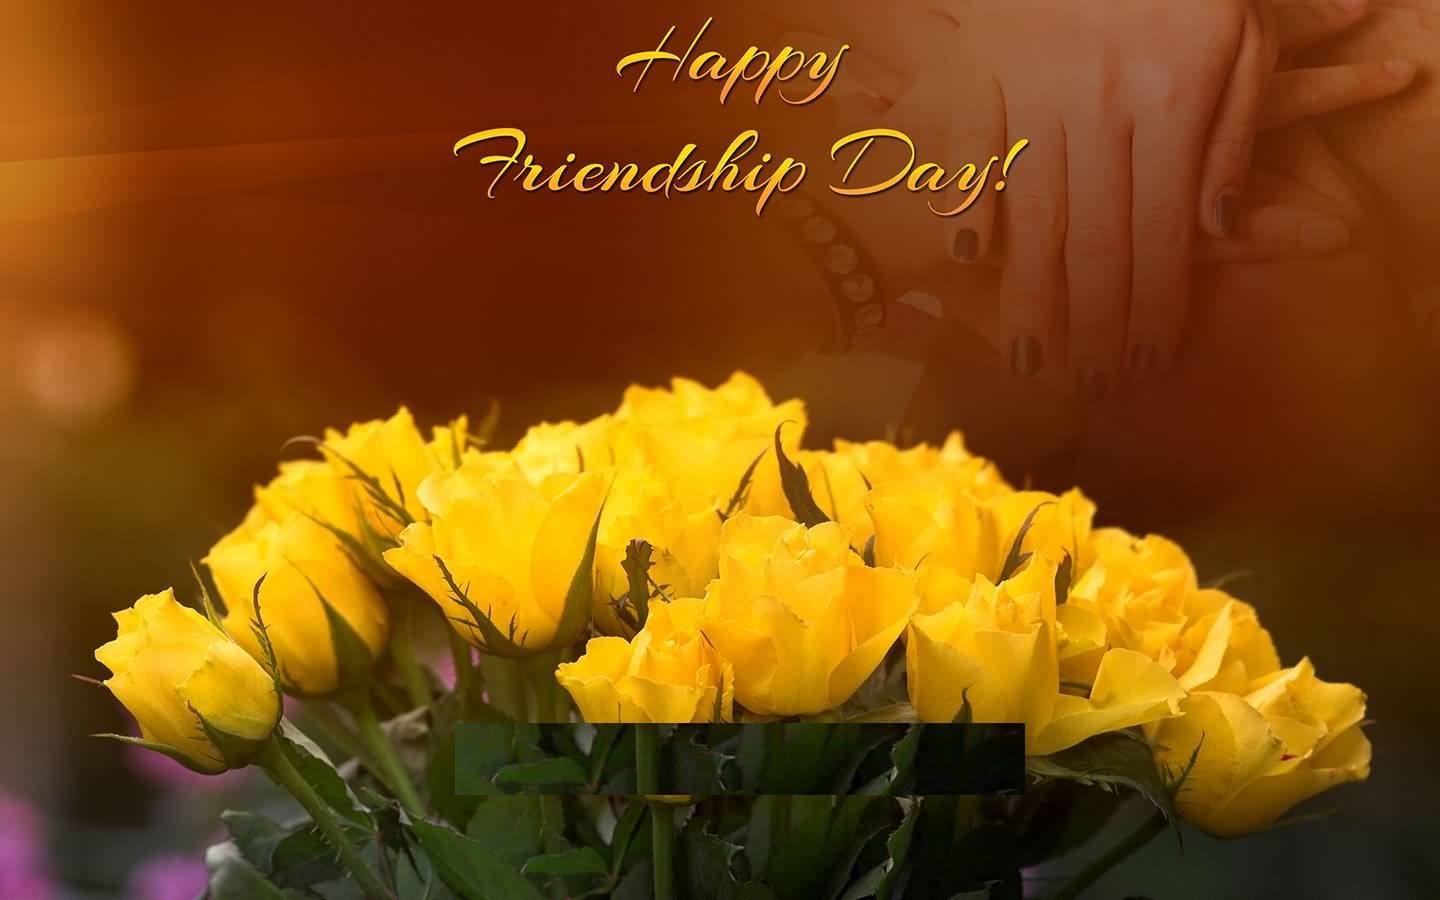 Happy Friendship Day Image Pictures Photos